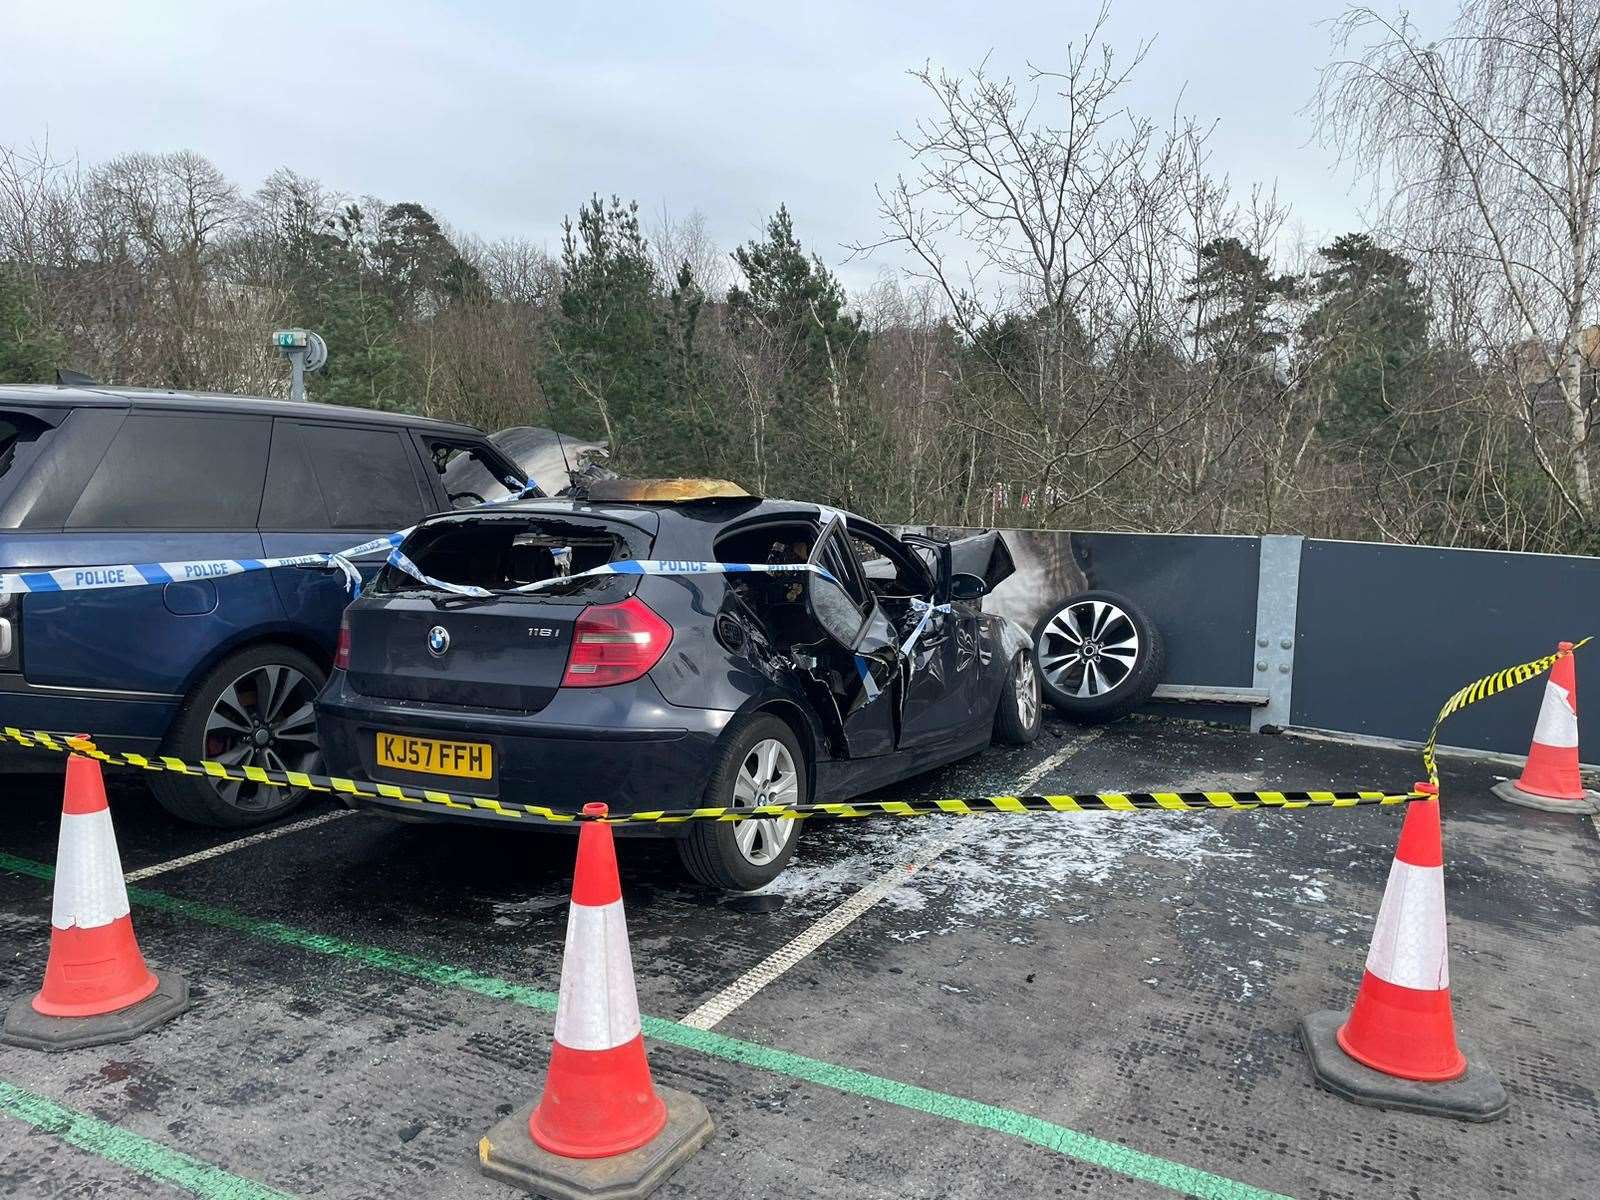 Crews used hose reel jets to extinguish the flames at Bradbourne Car Park in Sevenoaks which caused damage to three vehicles